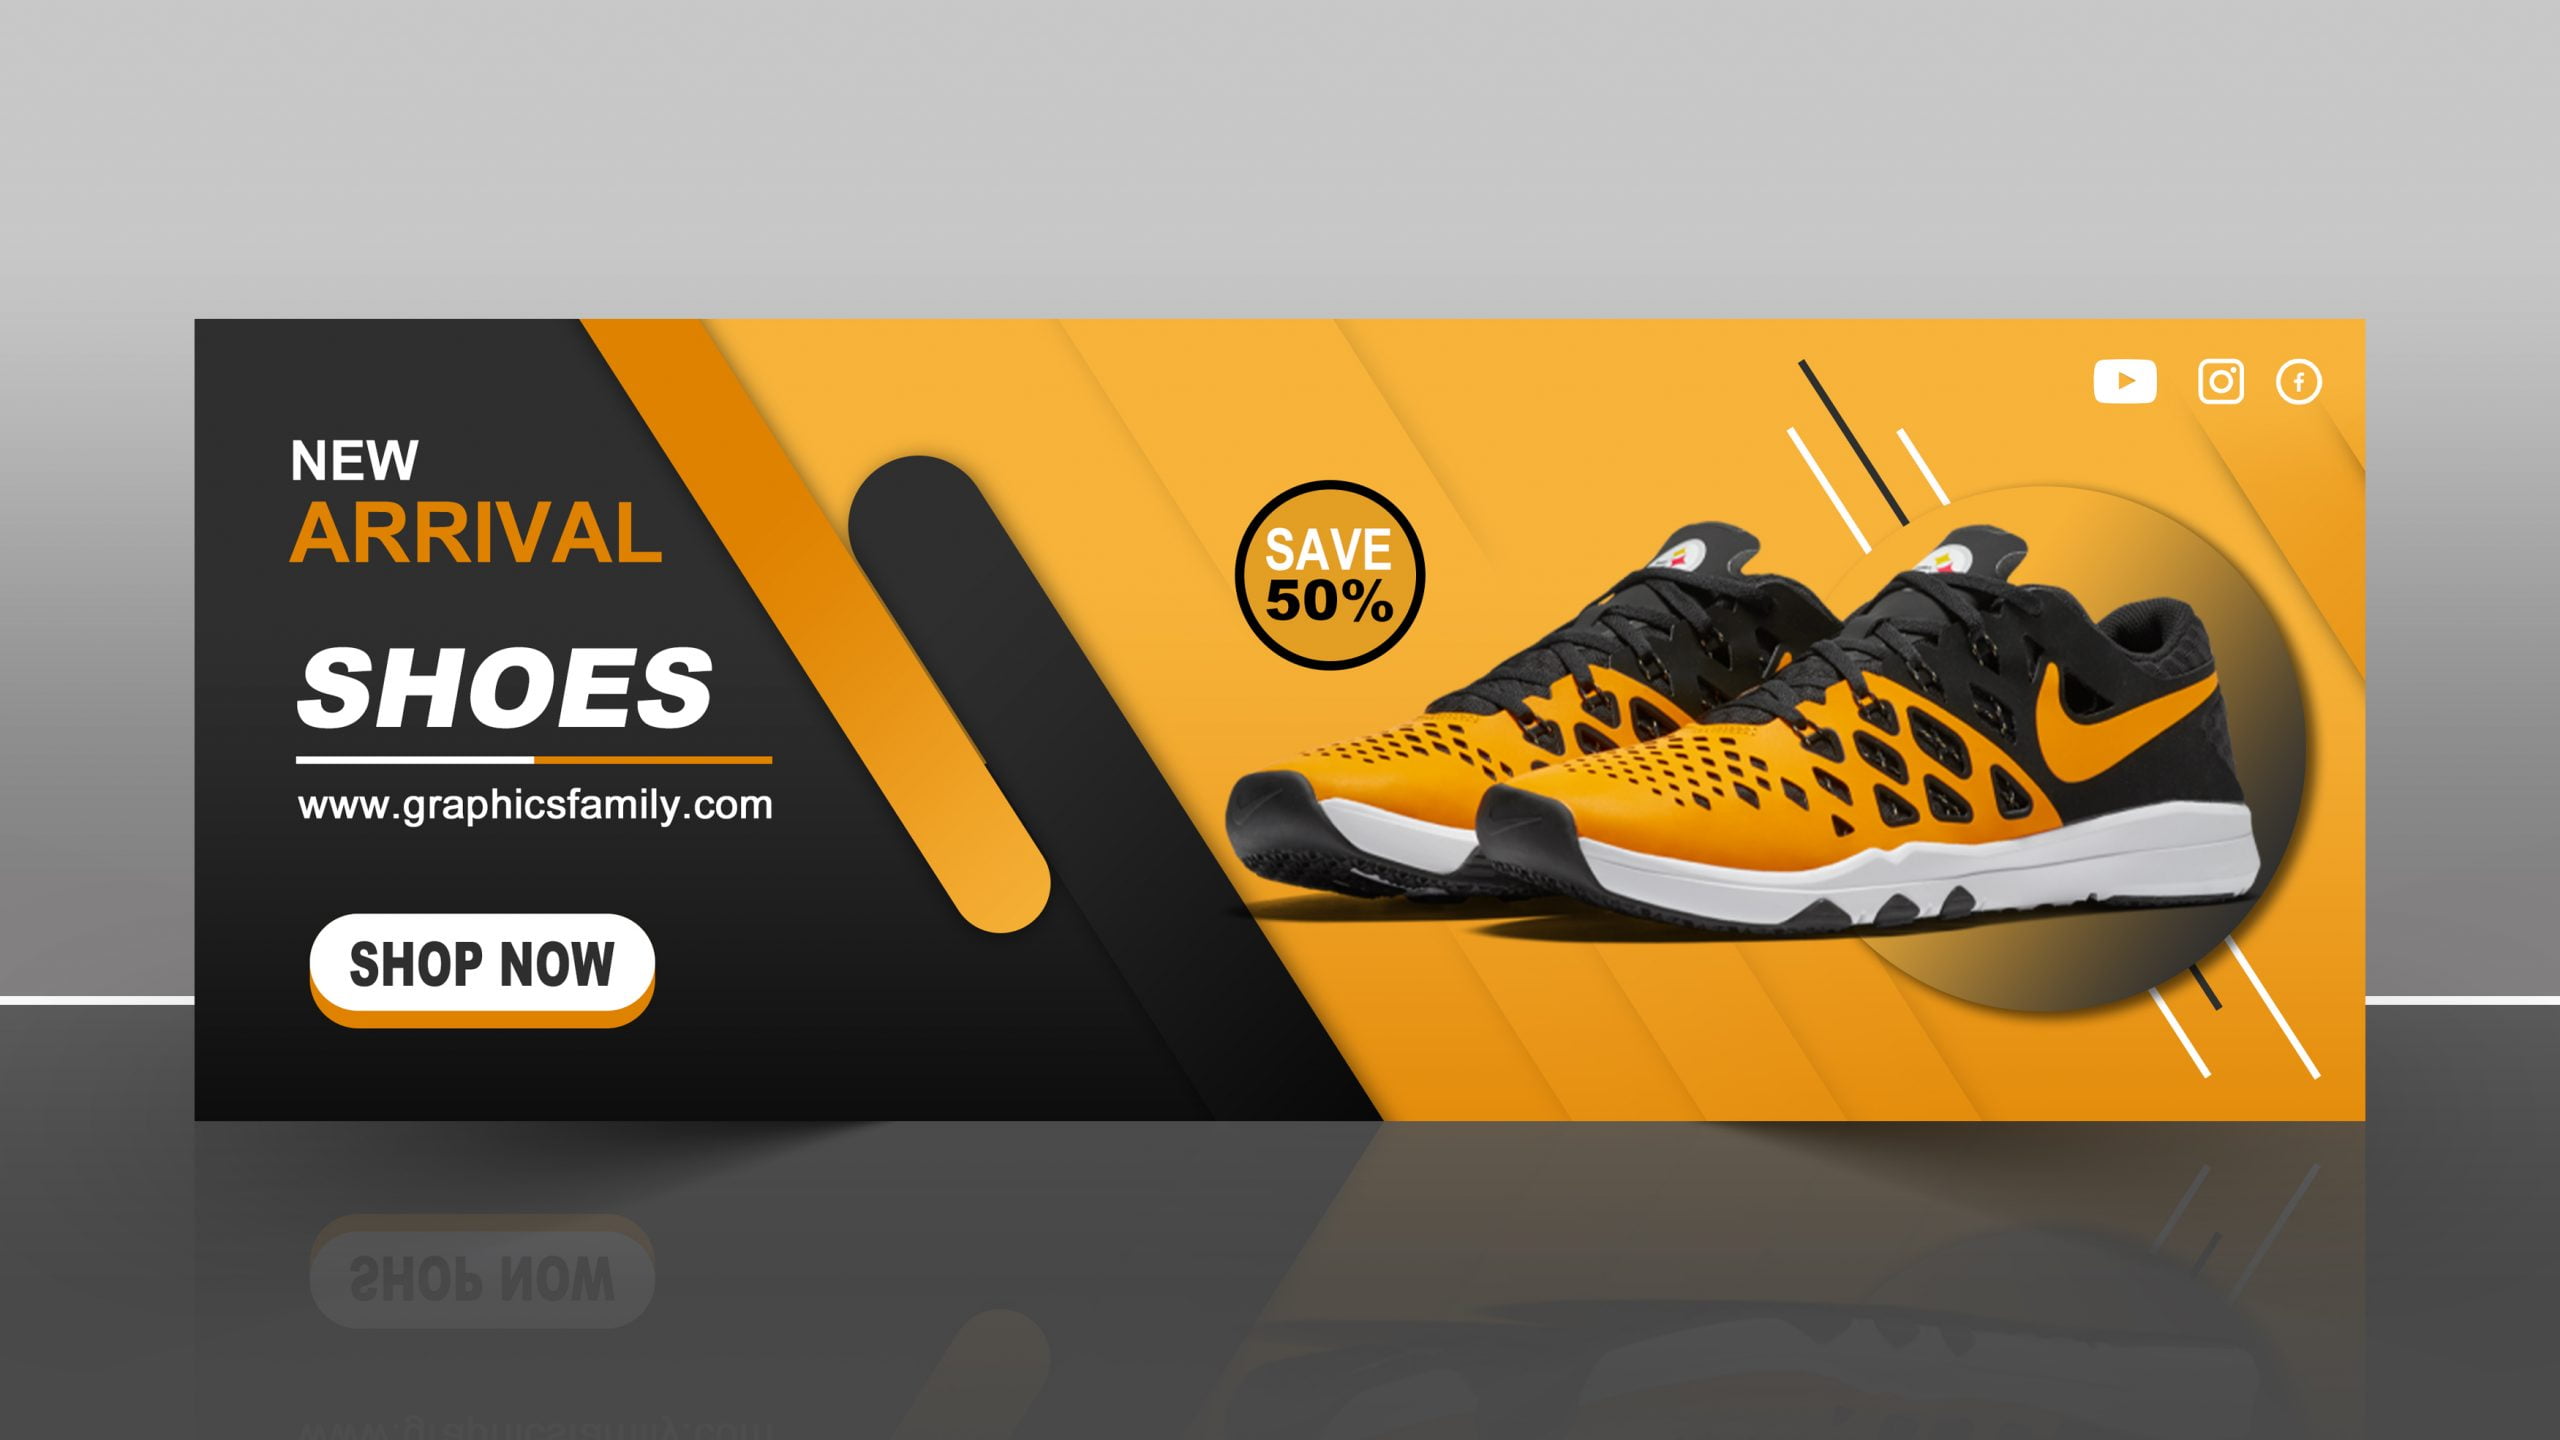 mesh Bezighouden goochelaar Facebook Shoes Sale Timeline Cover Banner Free PSD – GraphicsFamily